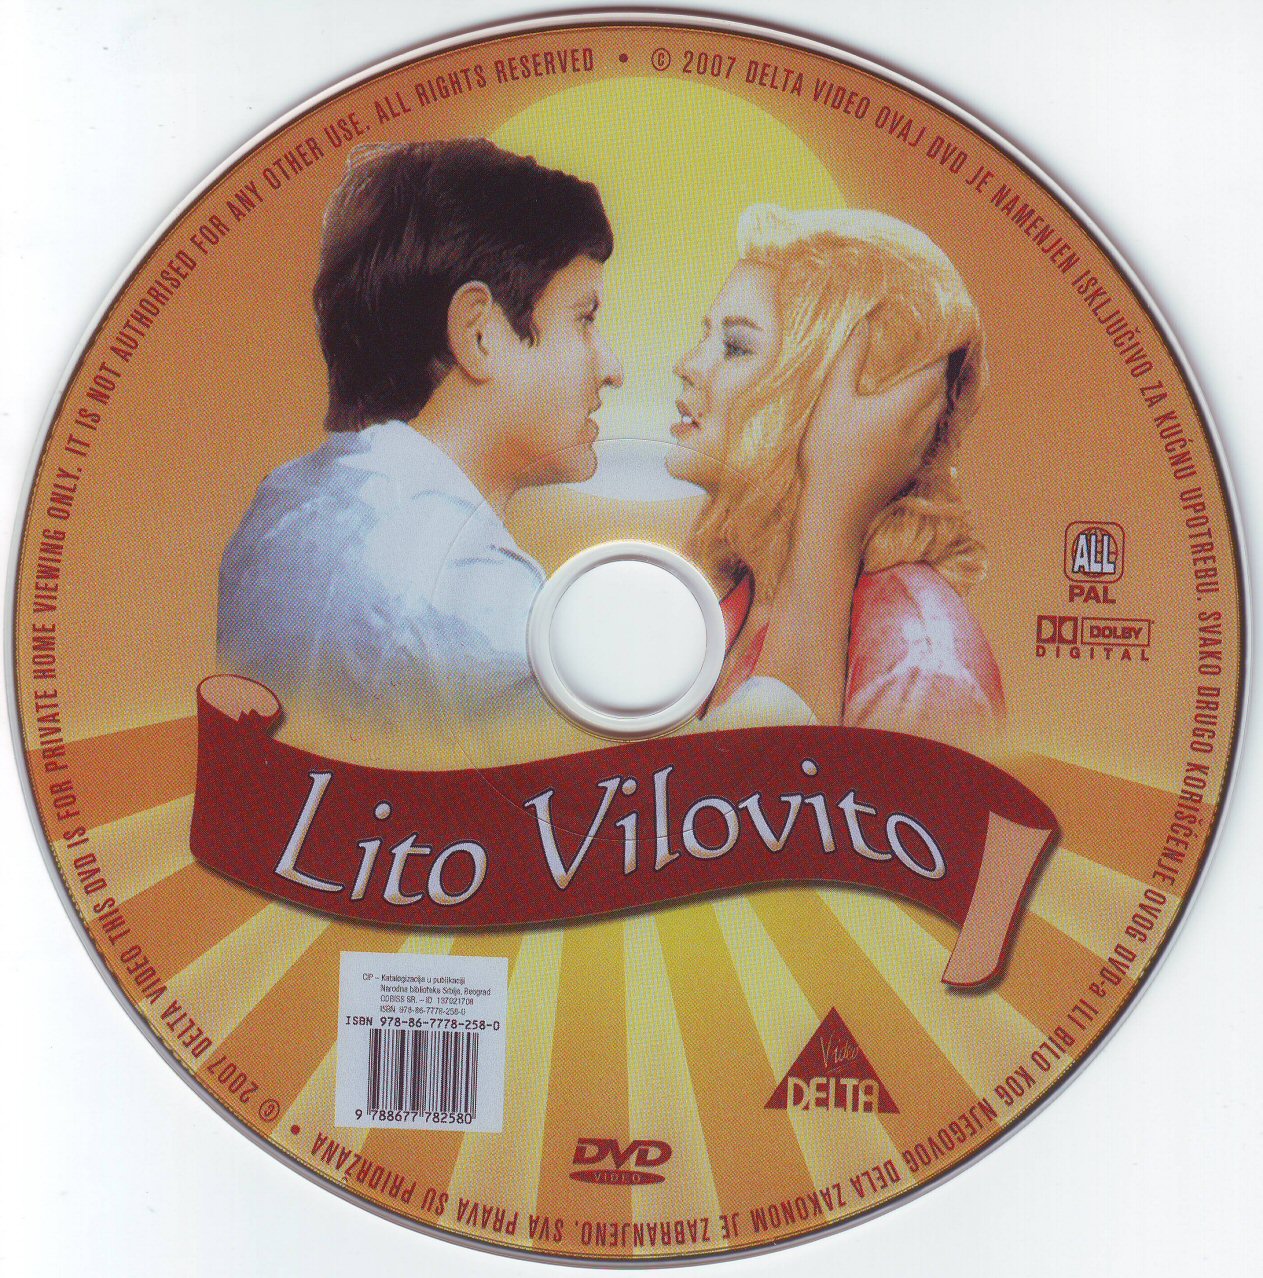 Click to view full size image -  DVD Cover - L - DVD - LITO VILOVITO - CD - DVD - LITO VILOVITO - CD.jpg